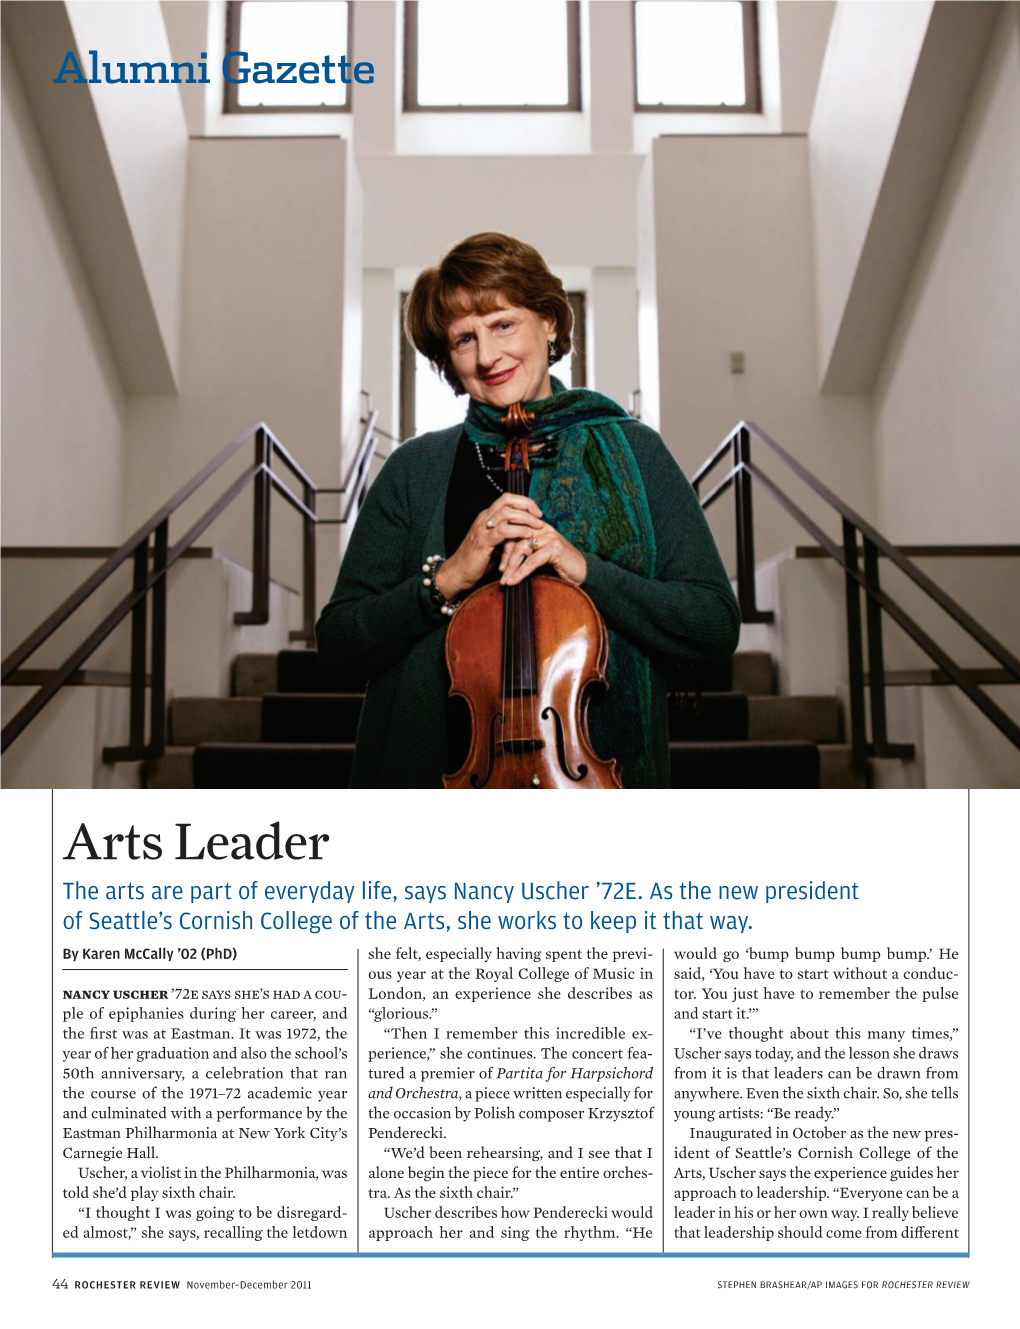 Arts Leader the Arts Are Part of Everyday Life, Says Nancy Uscher ’72E